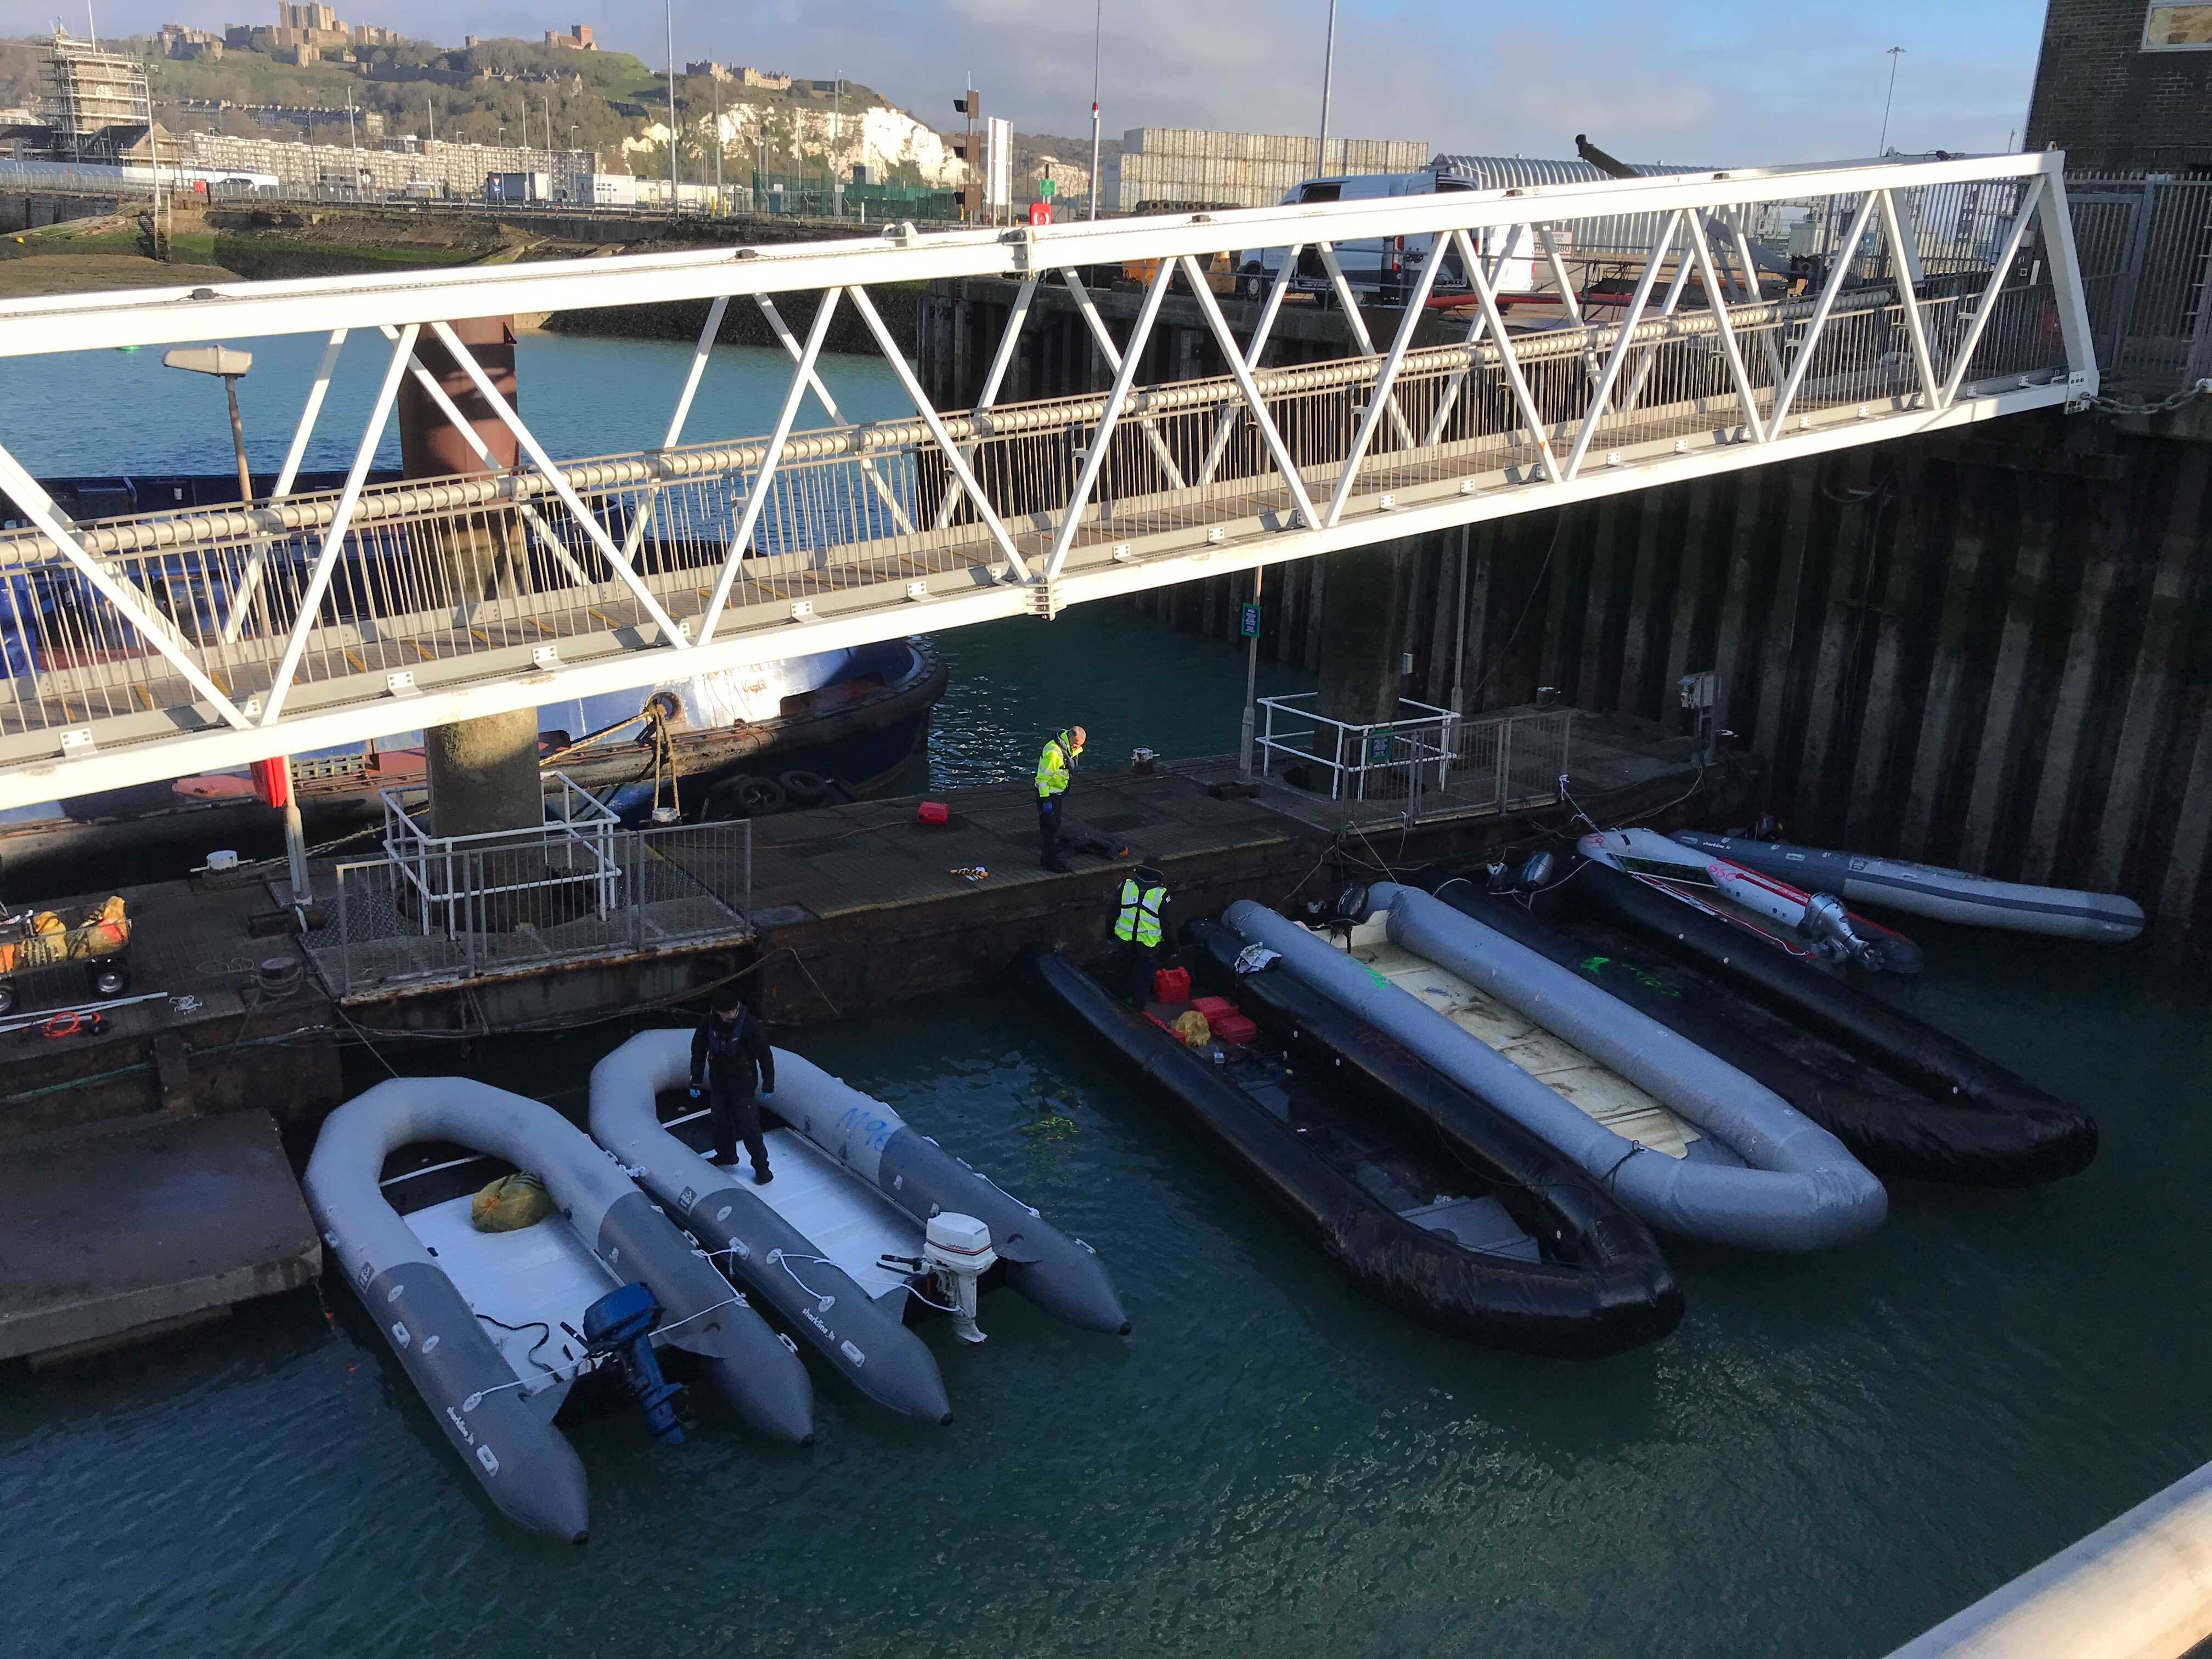 Border officials inspect a number of confiscated dinghies, with the two on the left believed to have been used in the Channel crossing on Thursday morning.